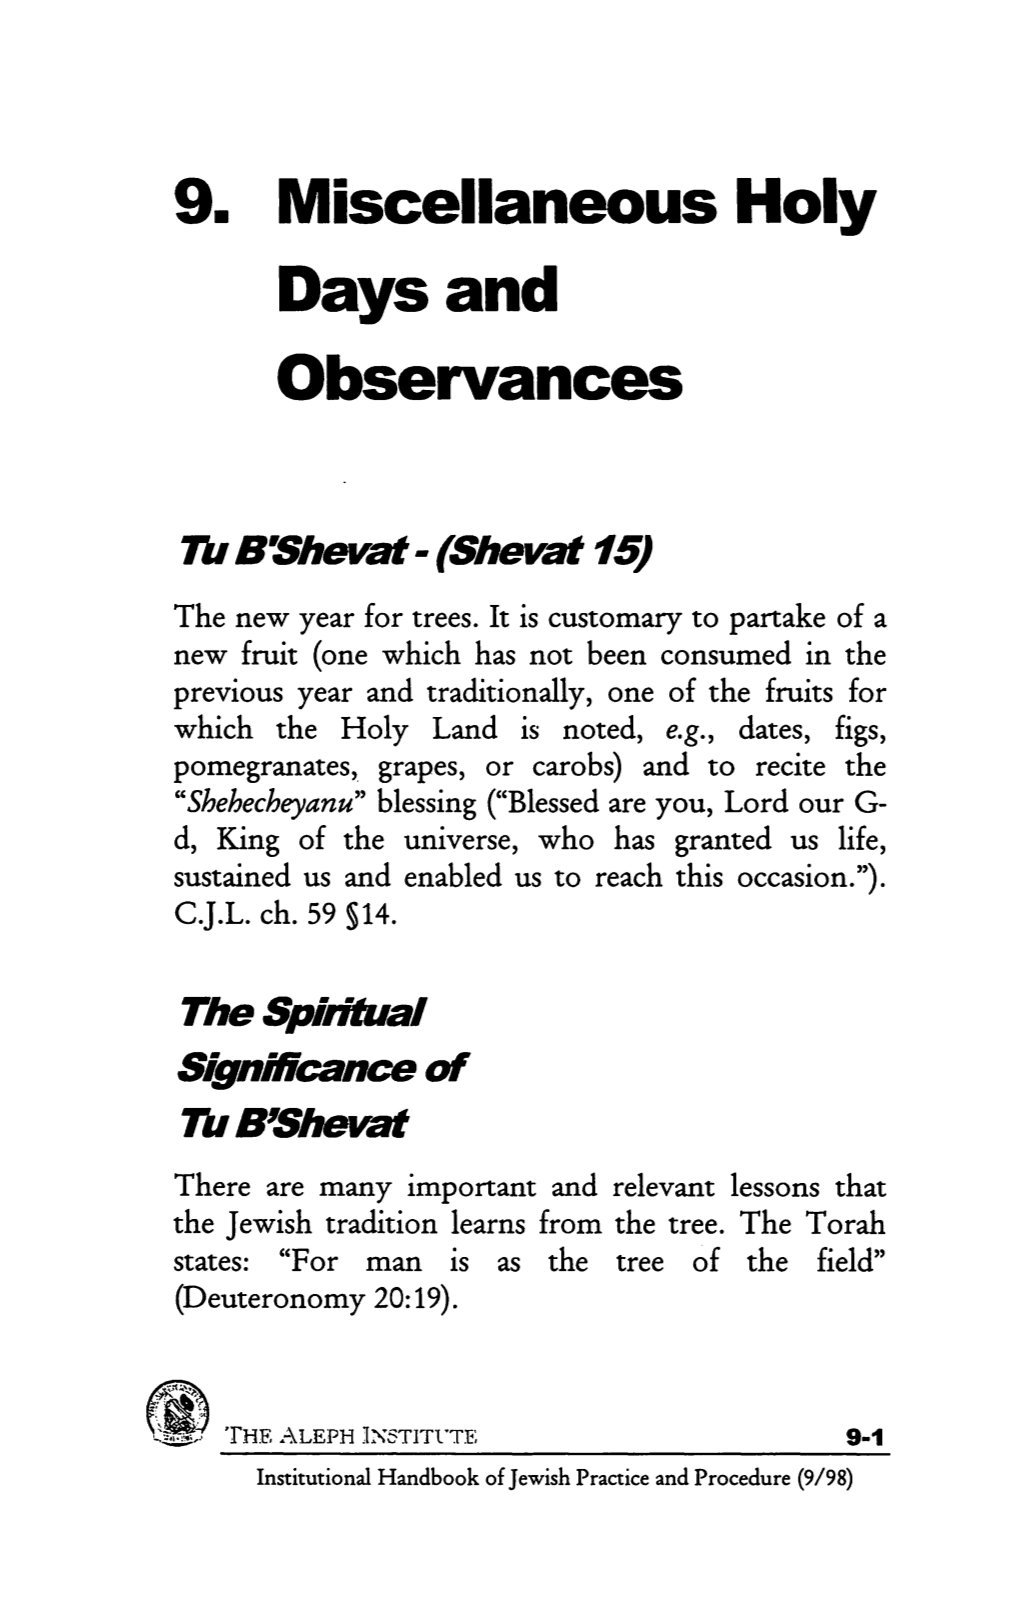 9. Miscellaneous Holy Days and Observances